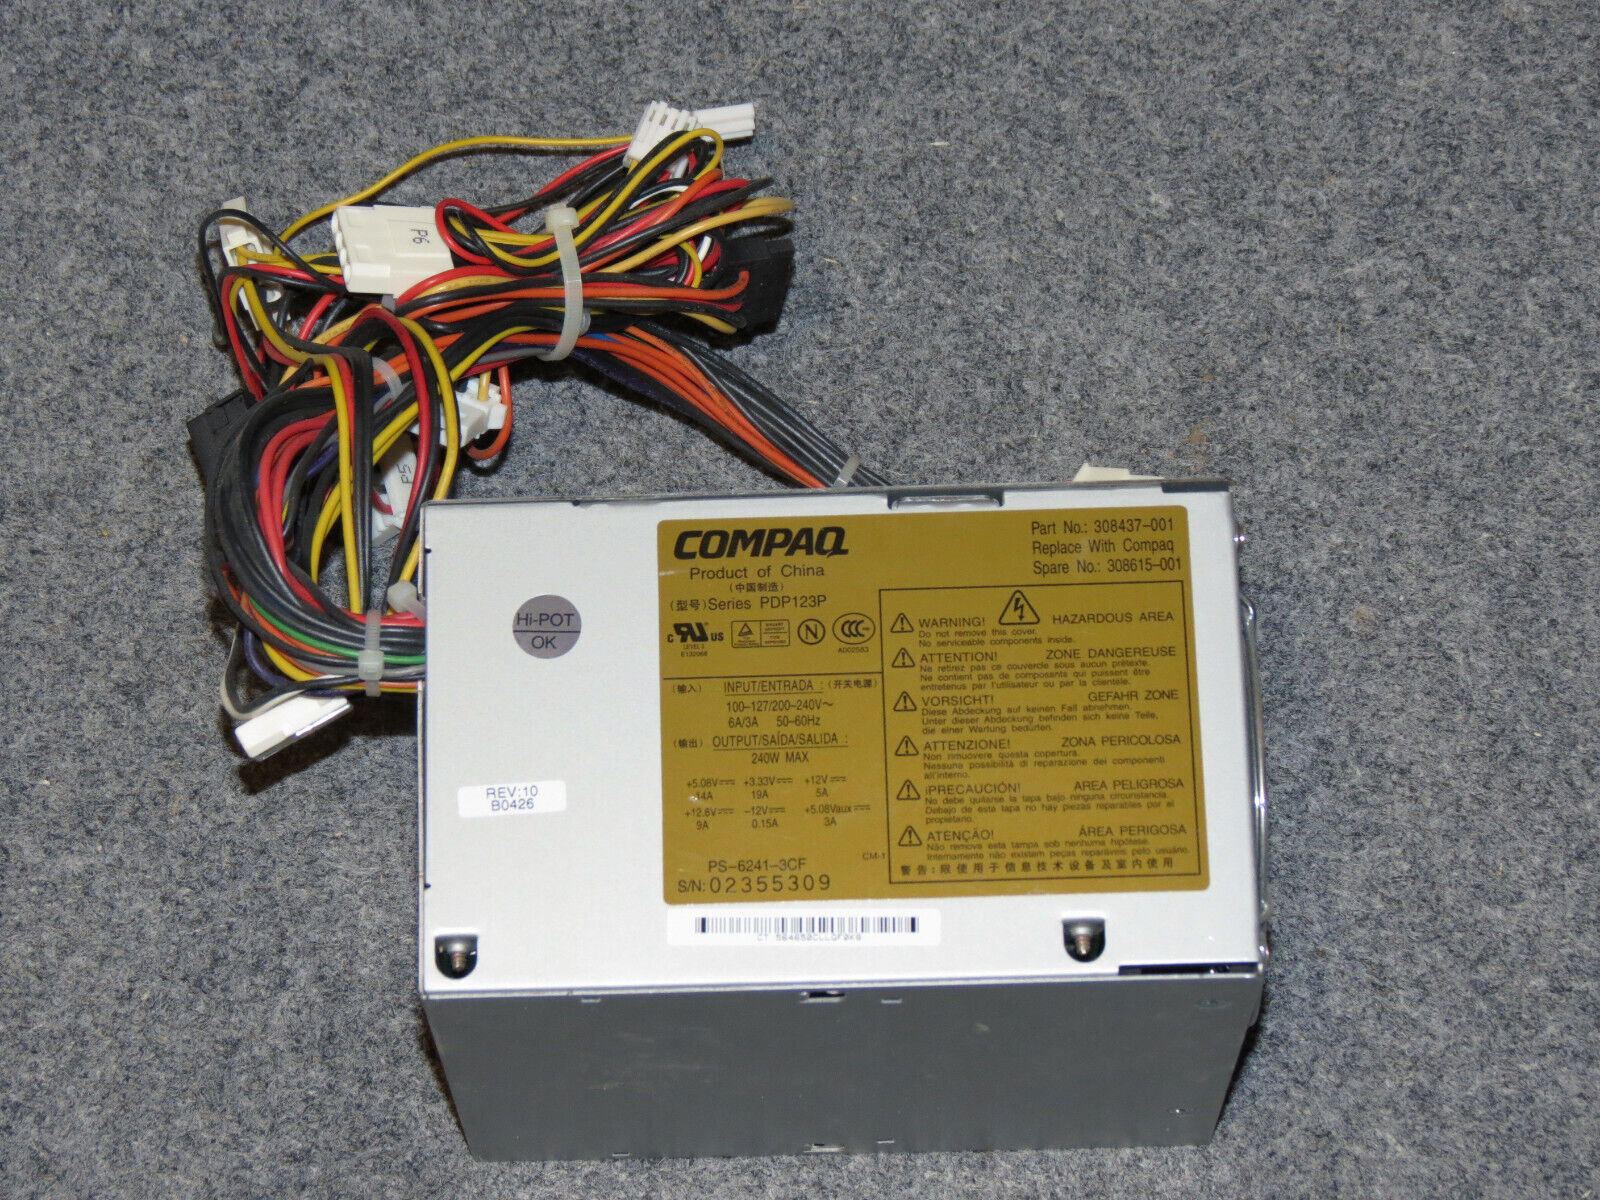 Power Supply 240 Watt for HP Compaq D330 & 530 Workstations - Fast Shipping